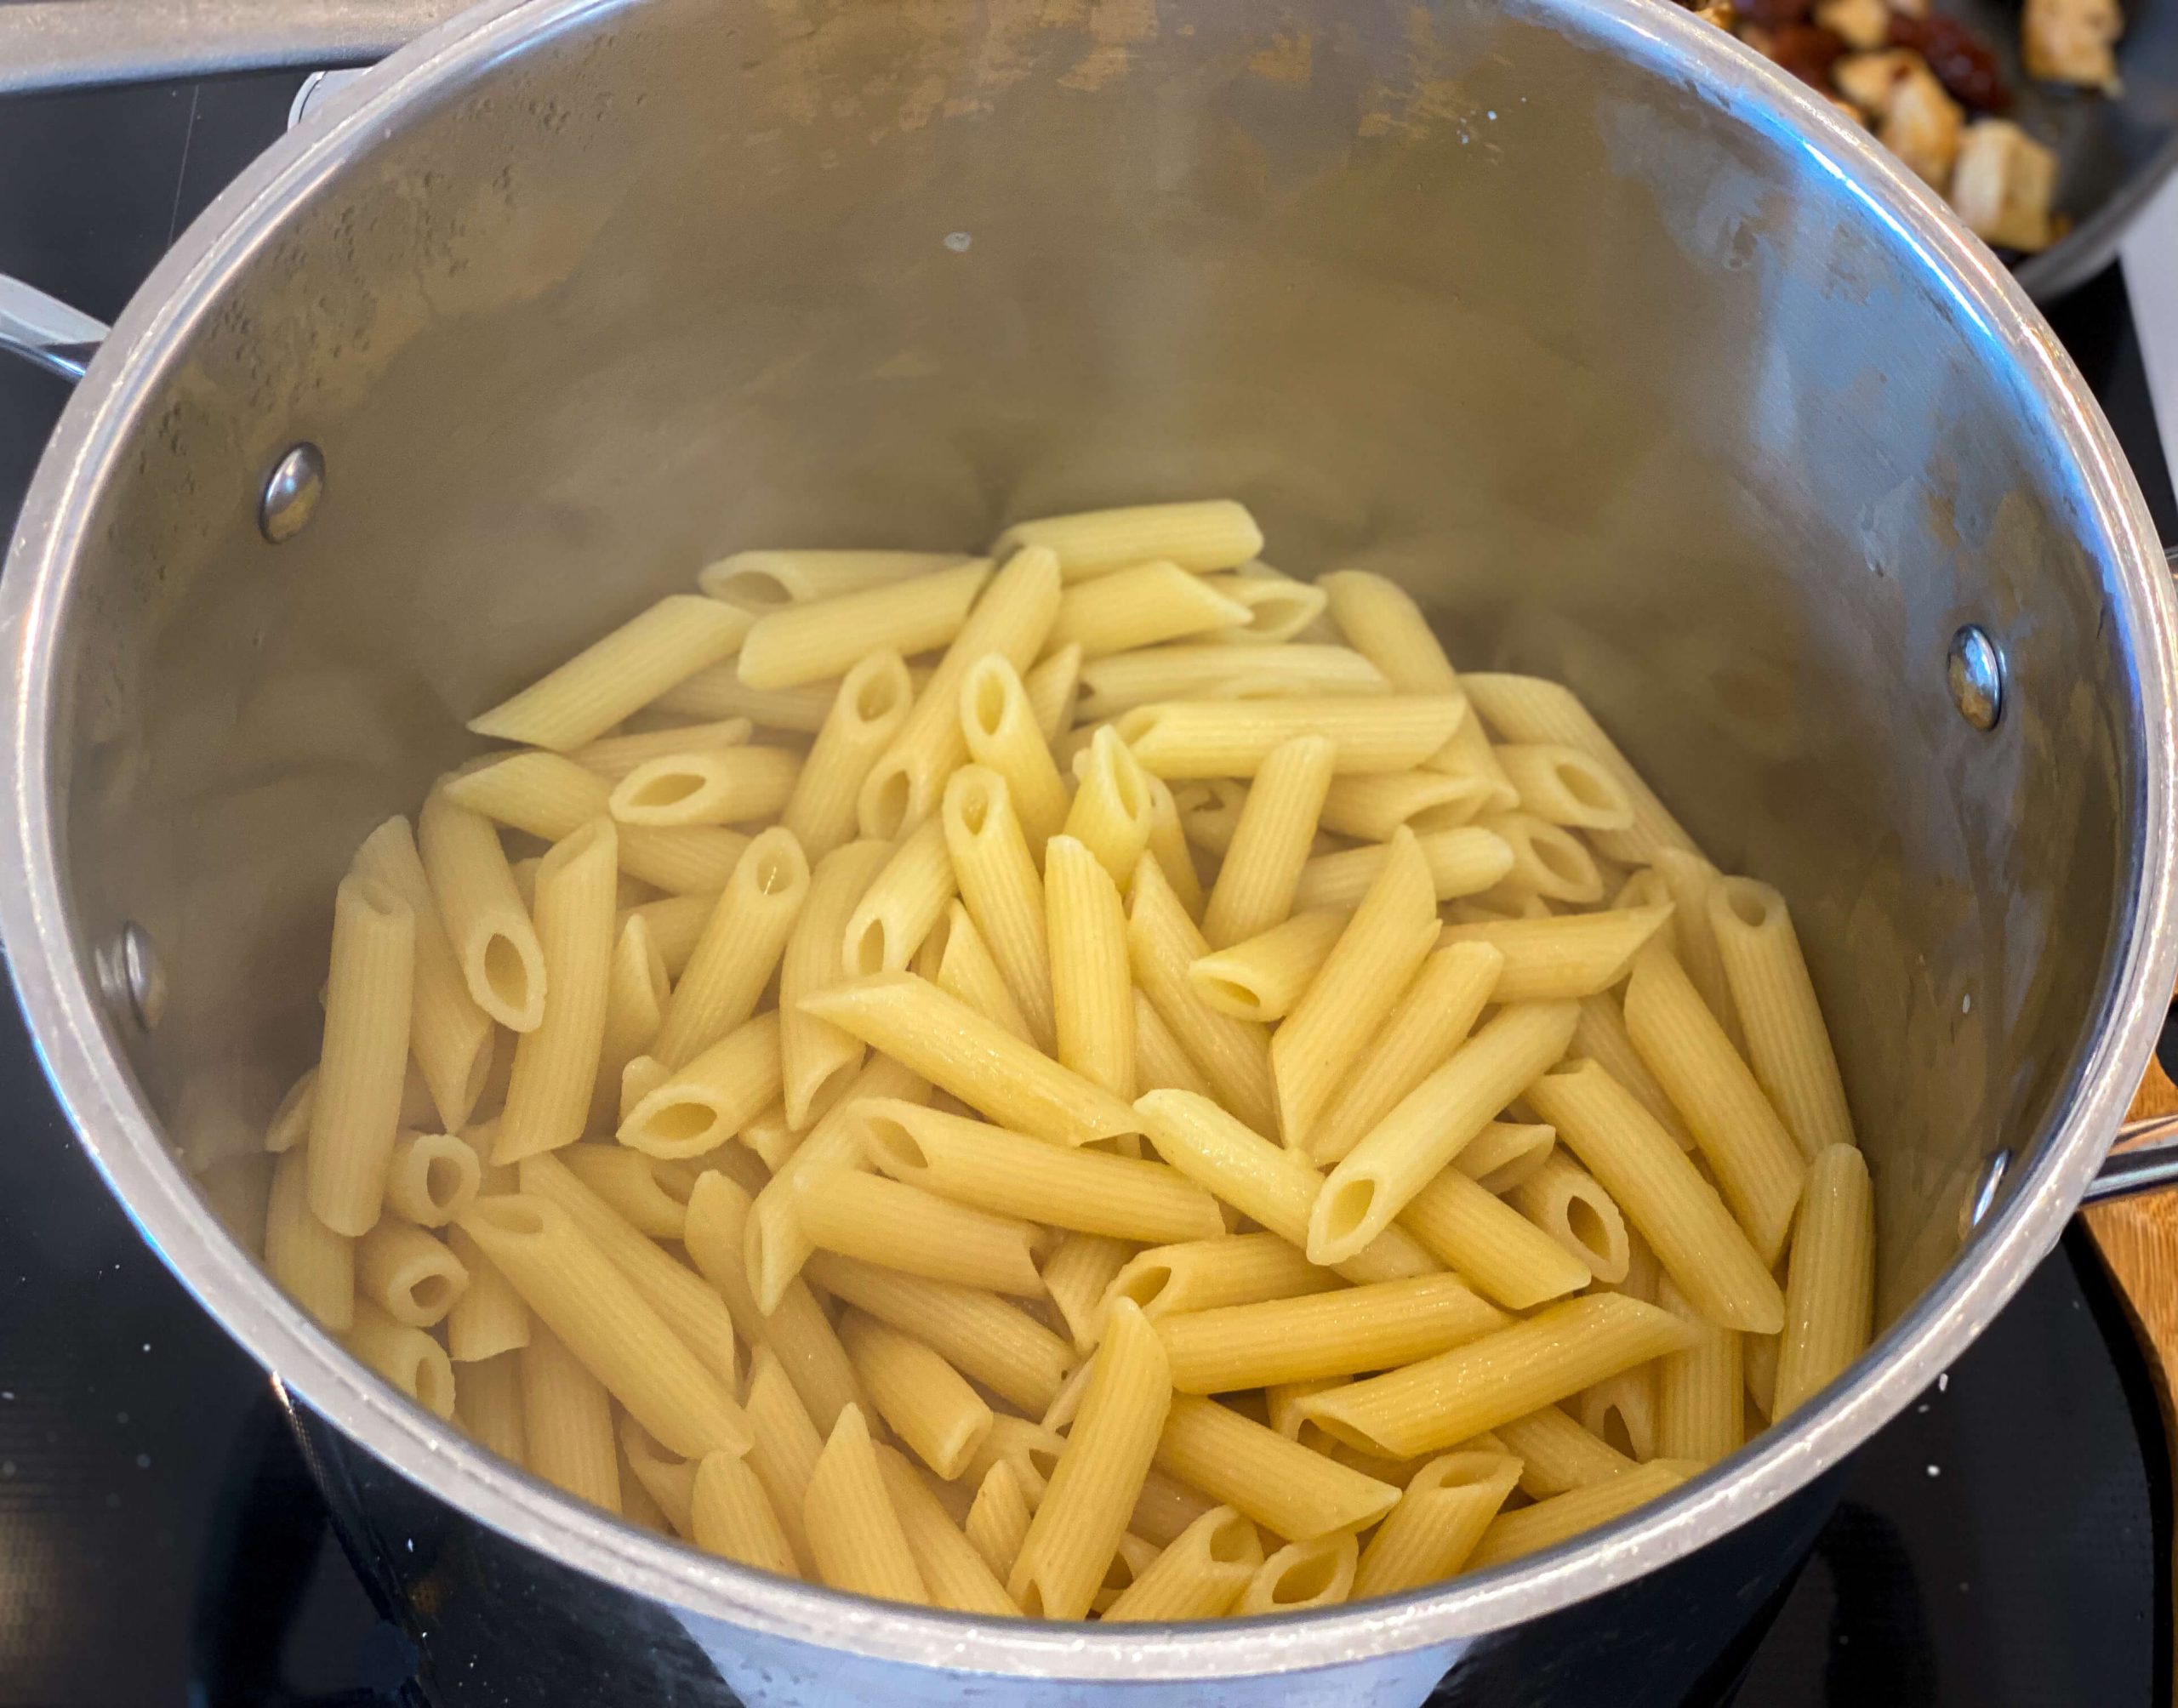 cooked pasta drained and placed back in the cooking pot